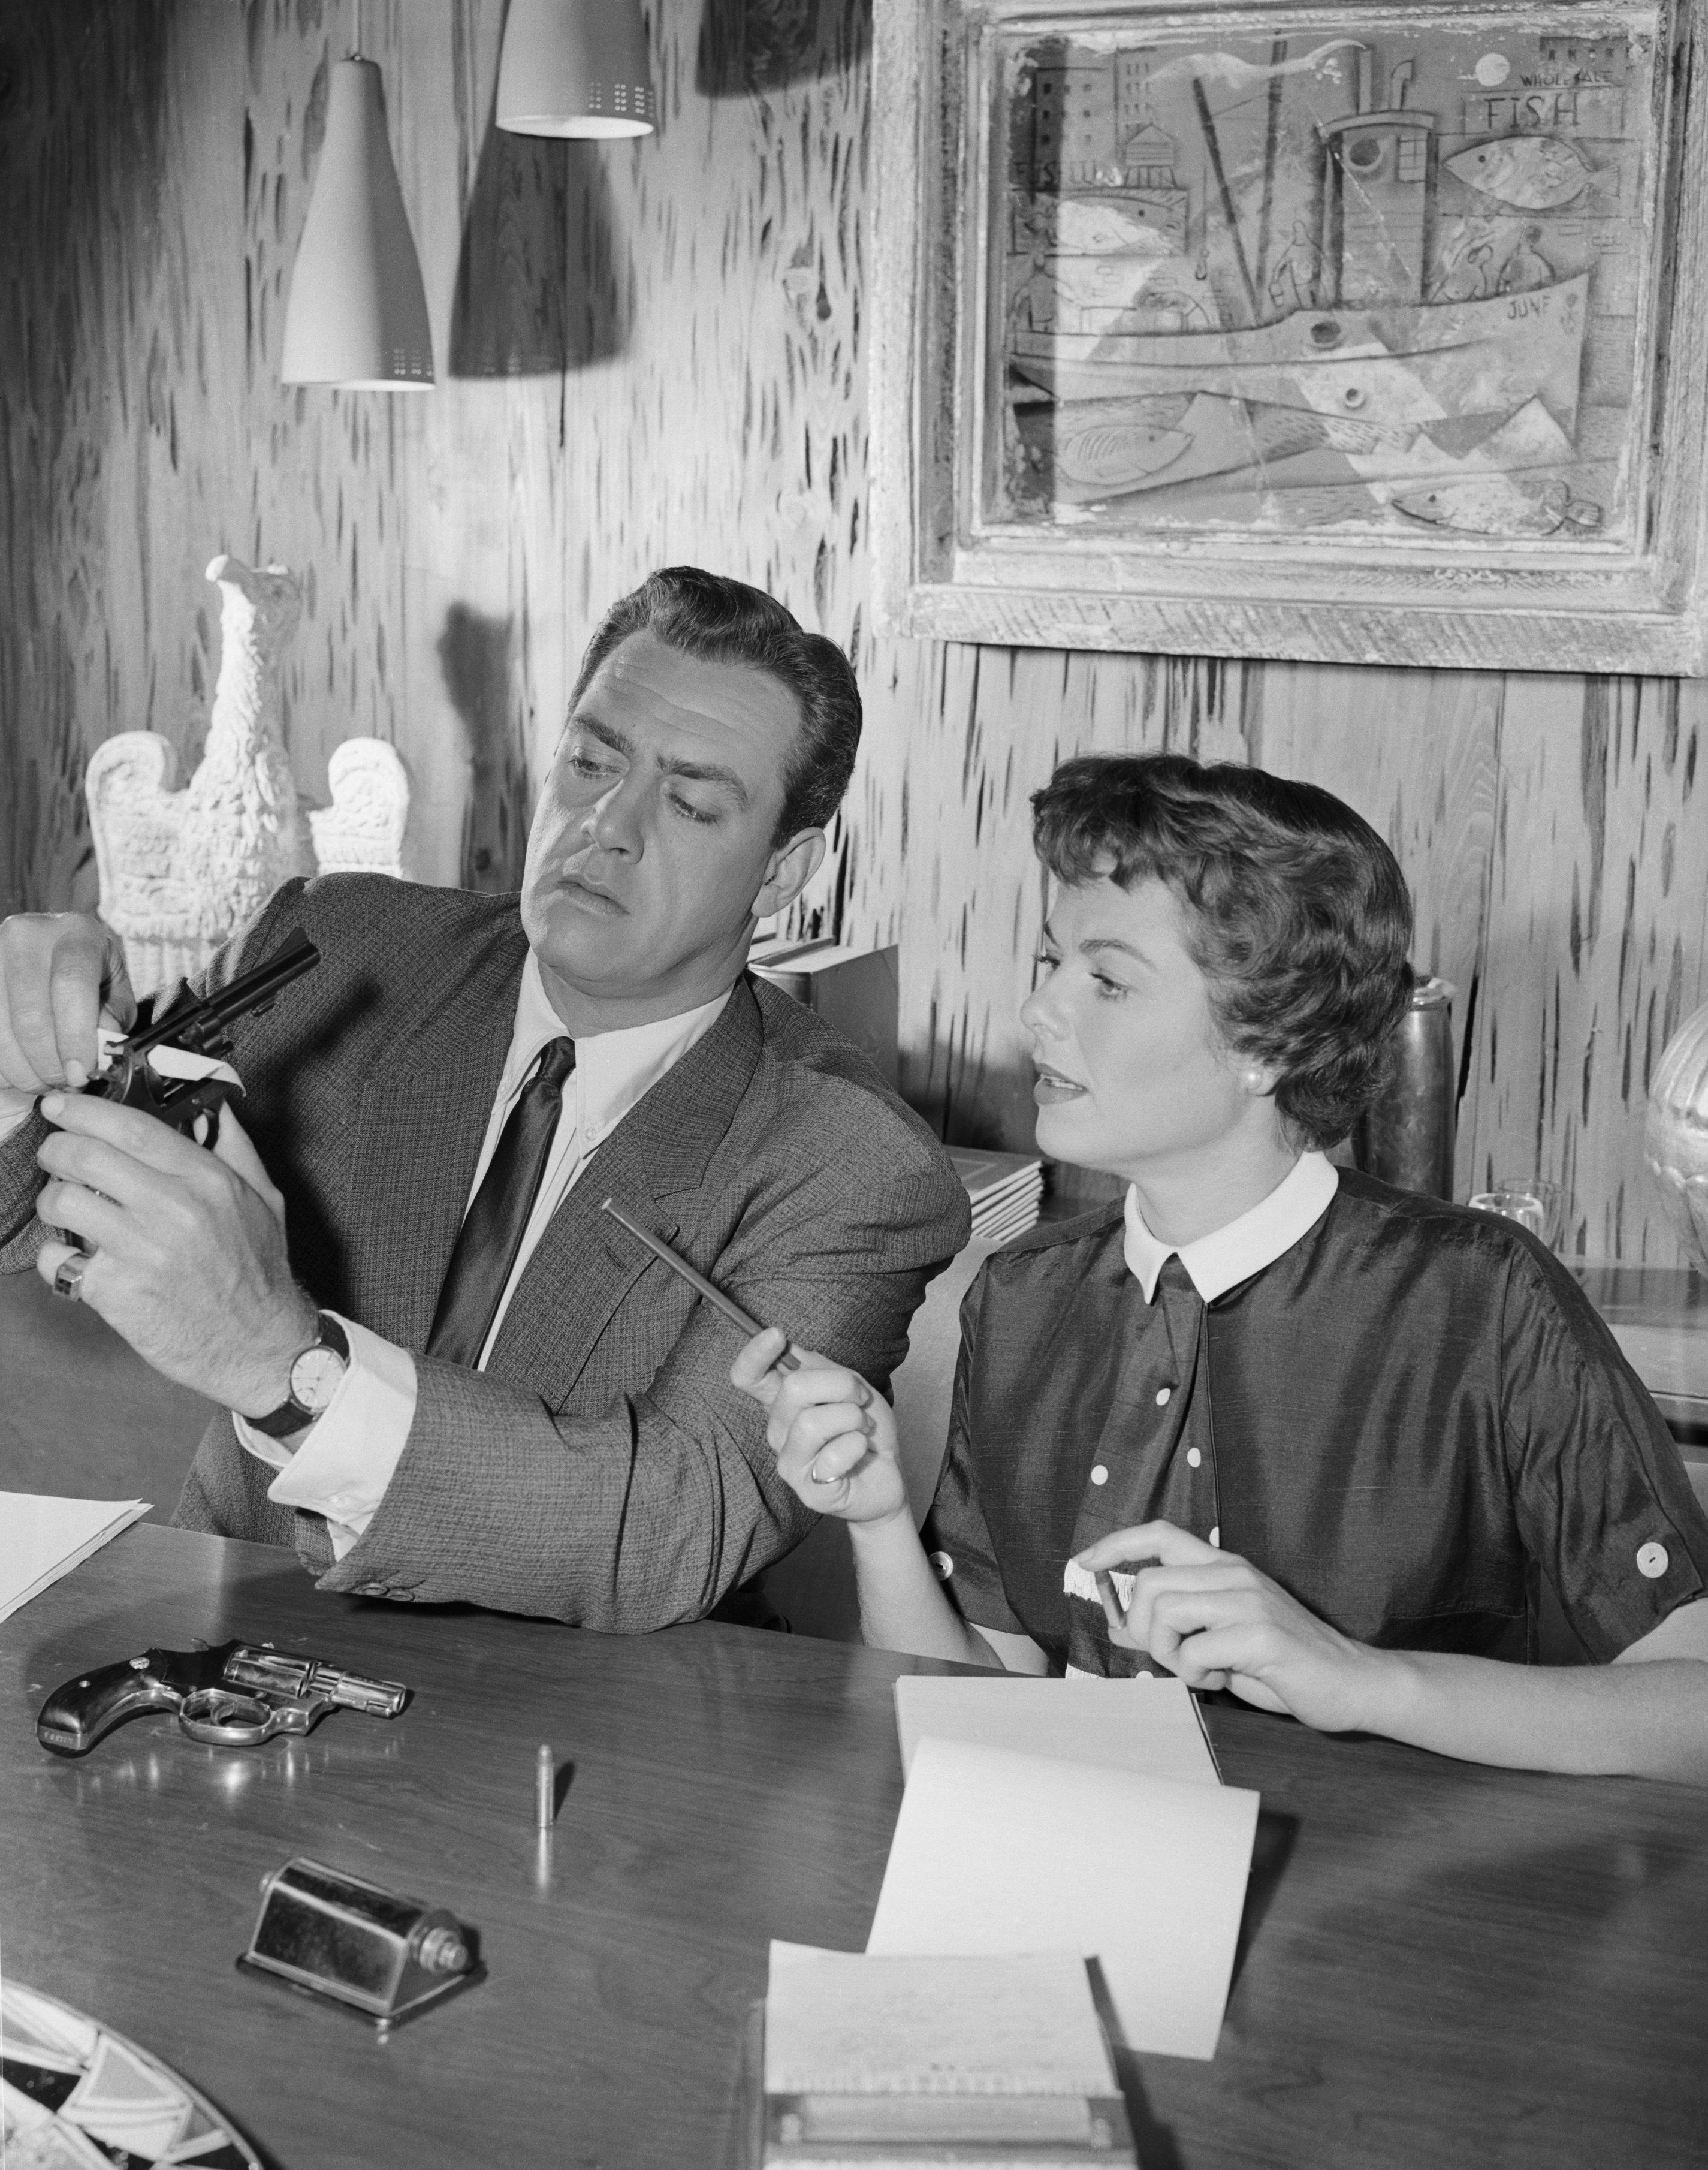 Raymond Burr with co-star actress Barbara Hale as Perry Mason and Della Street in the TV series "Perry Mason" which aired from 1957 to 1966. / Source: Getty Images